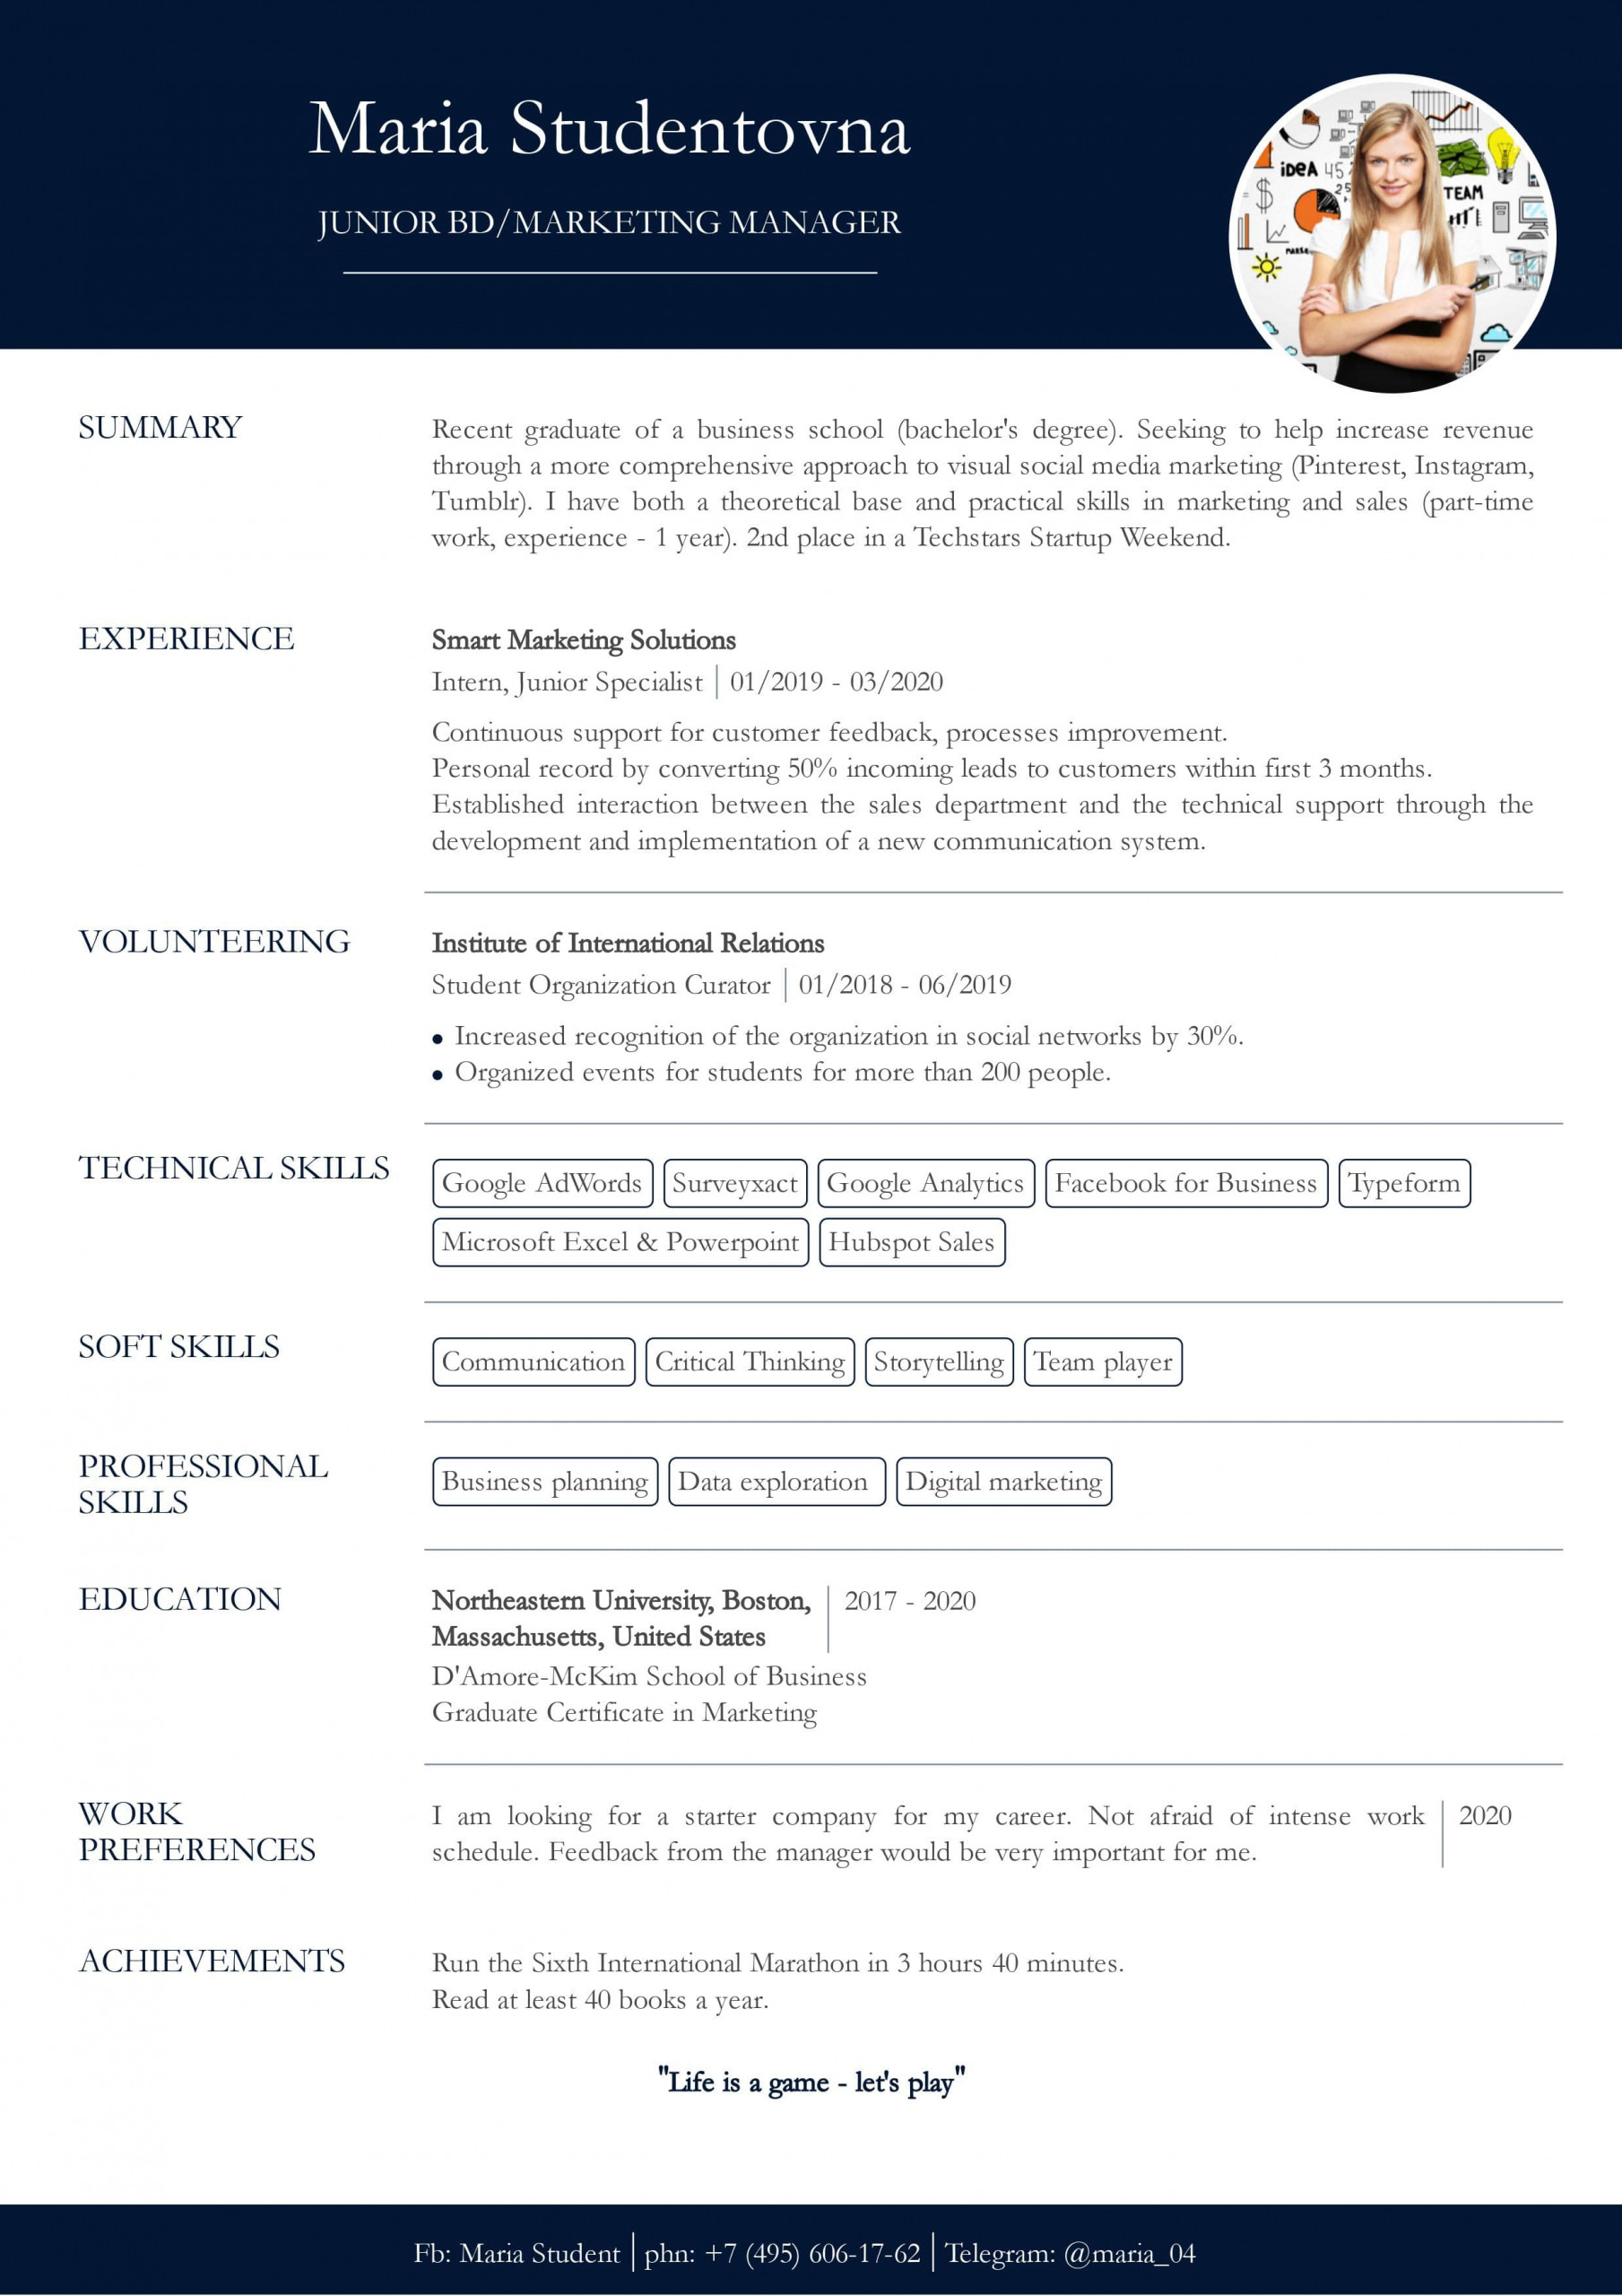 Resume Template Teenager No Job Experience Resume with No Work Experience. Sample for Students. – Cv2you Blog